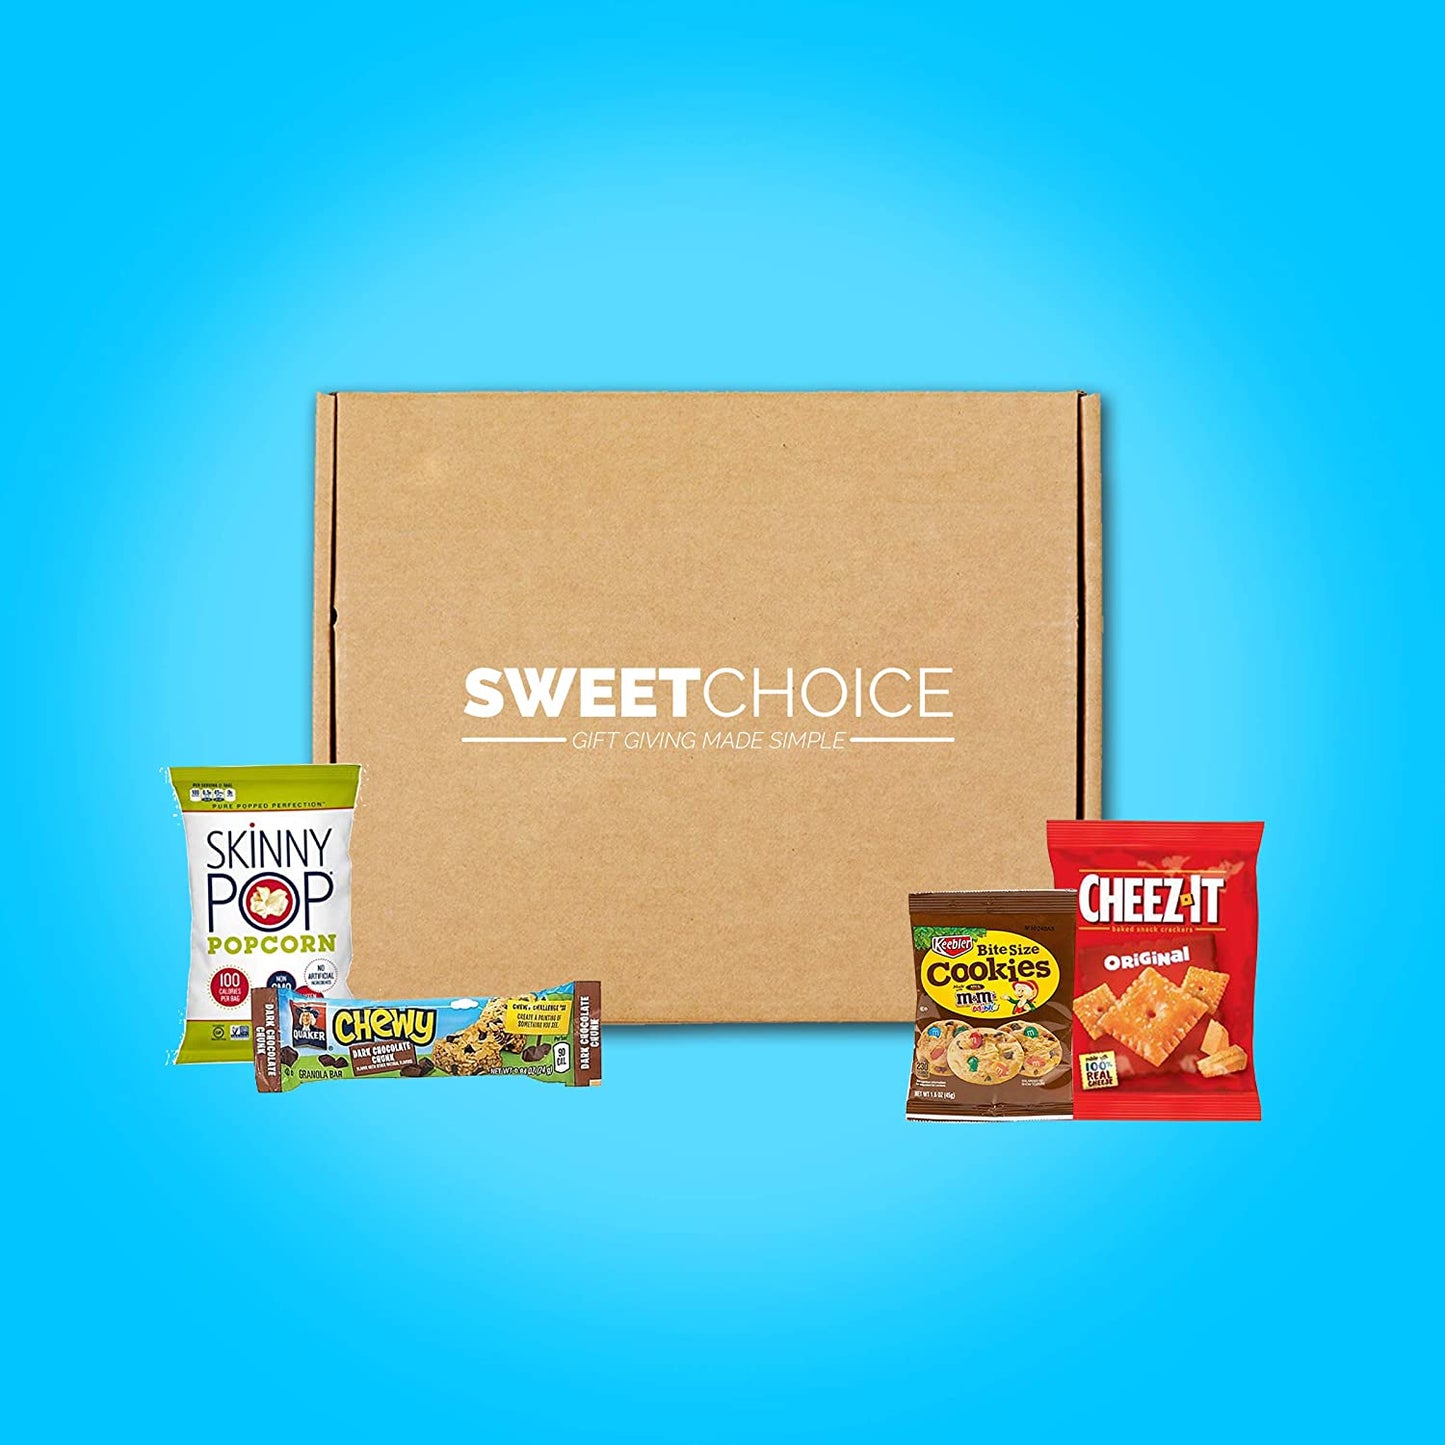 Care Package (150) Variety Snacks Gift Box Bulk Snacks - College Students, Military, Work or Home - Over 9 Pounds of Snacks! Snack Box